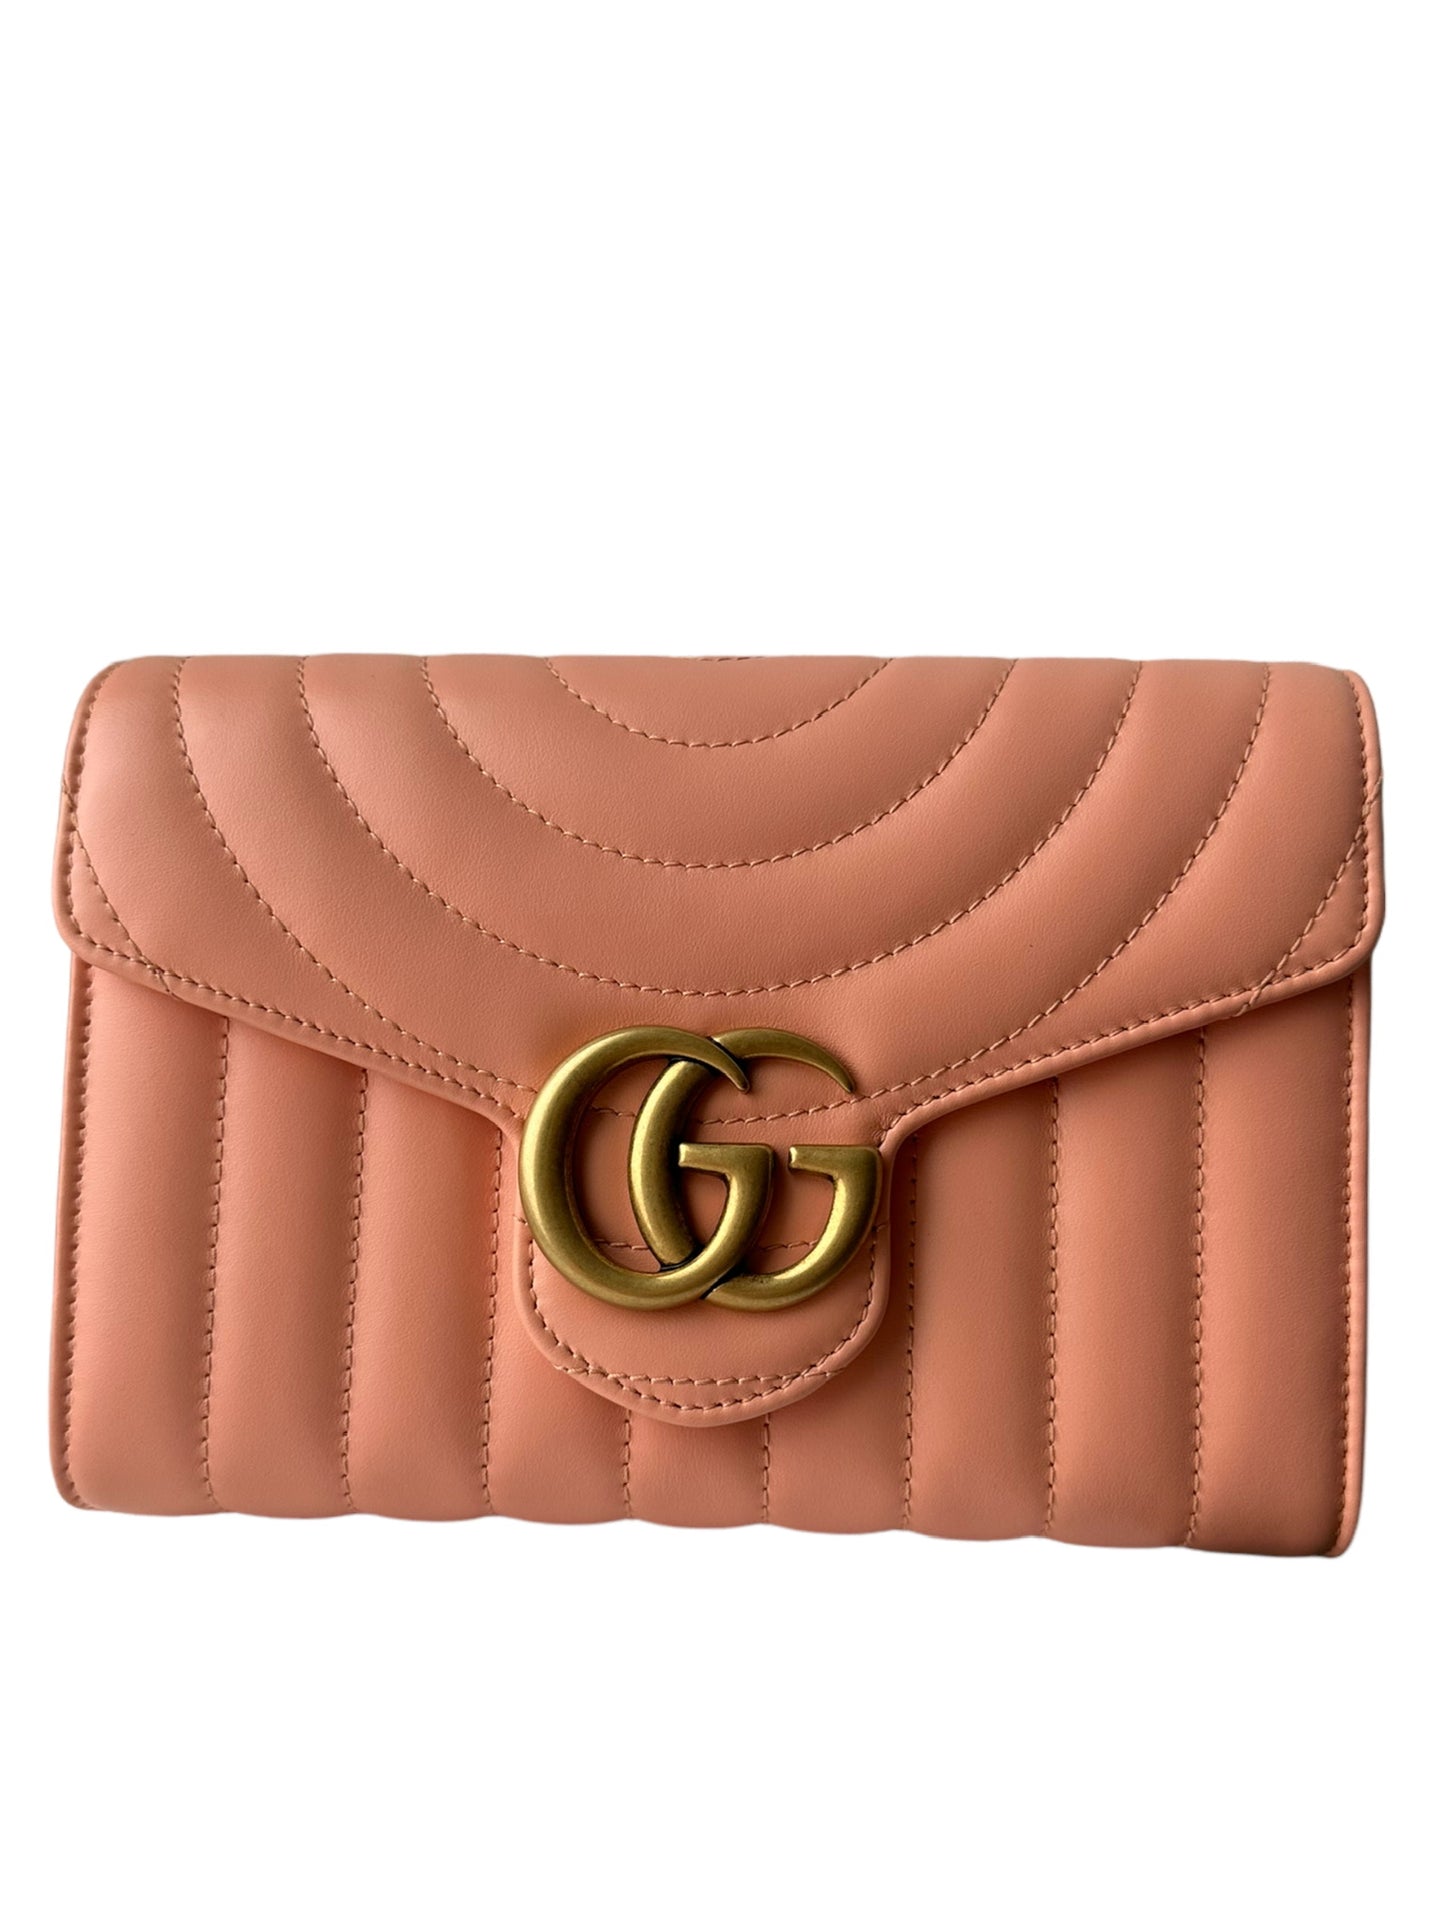 GUCCI - GG Marmont Wallet on Chain Peach